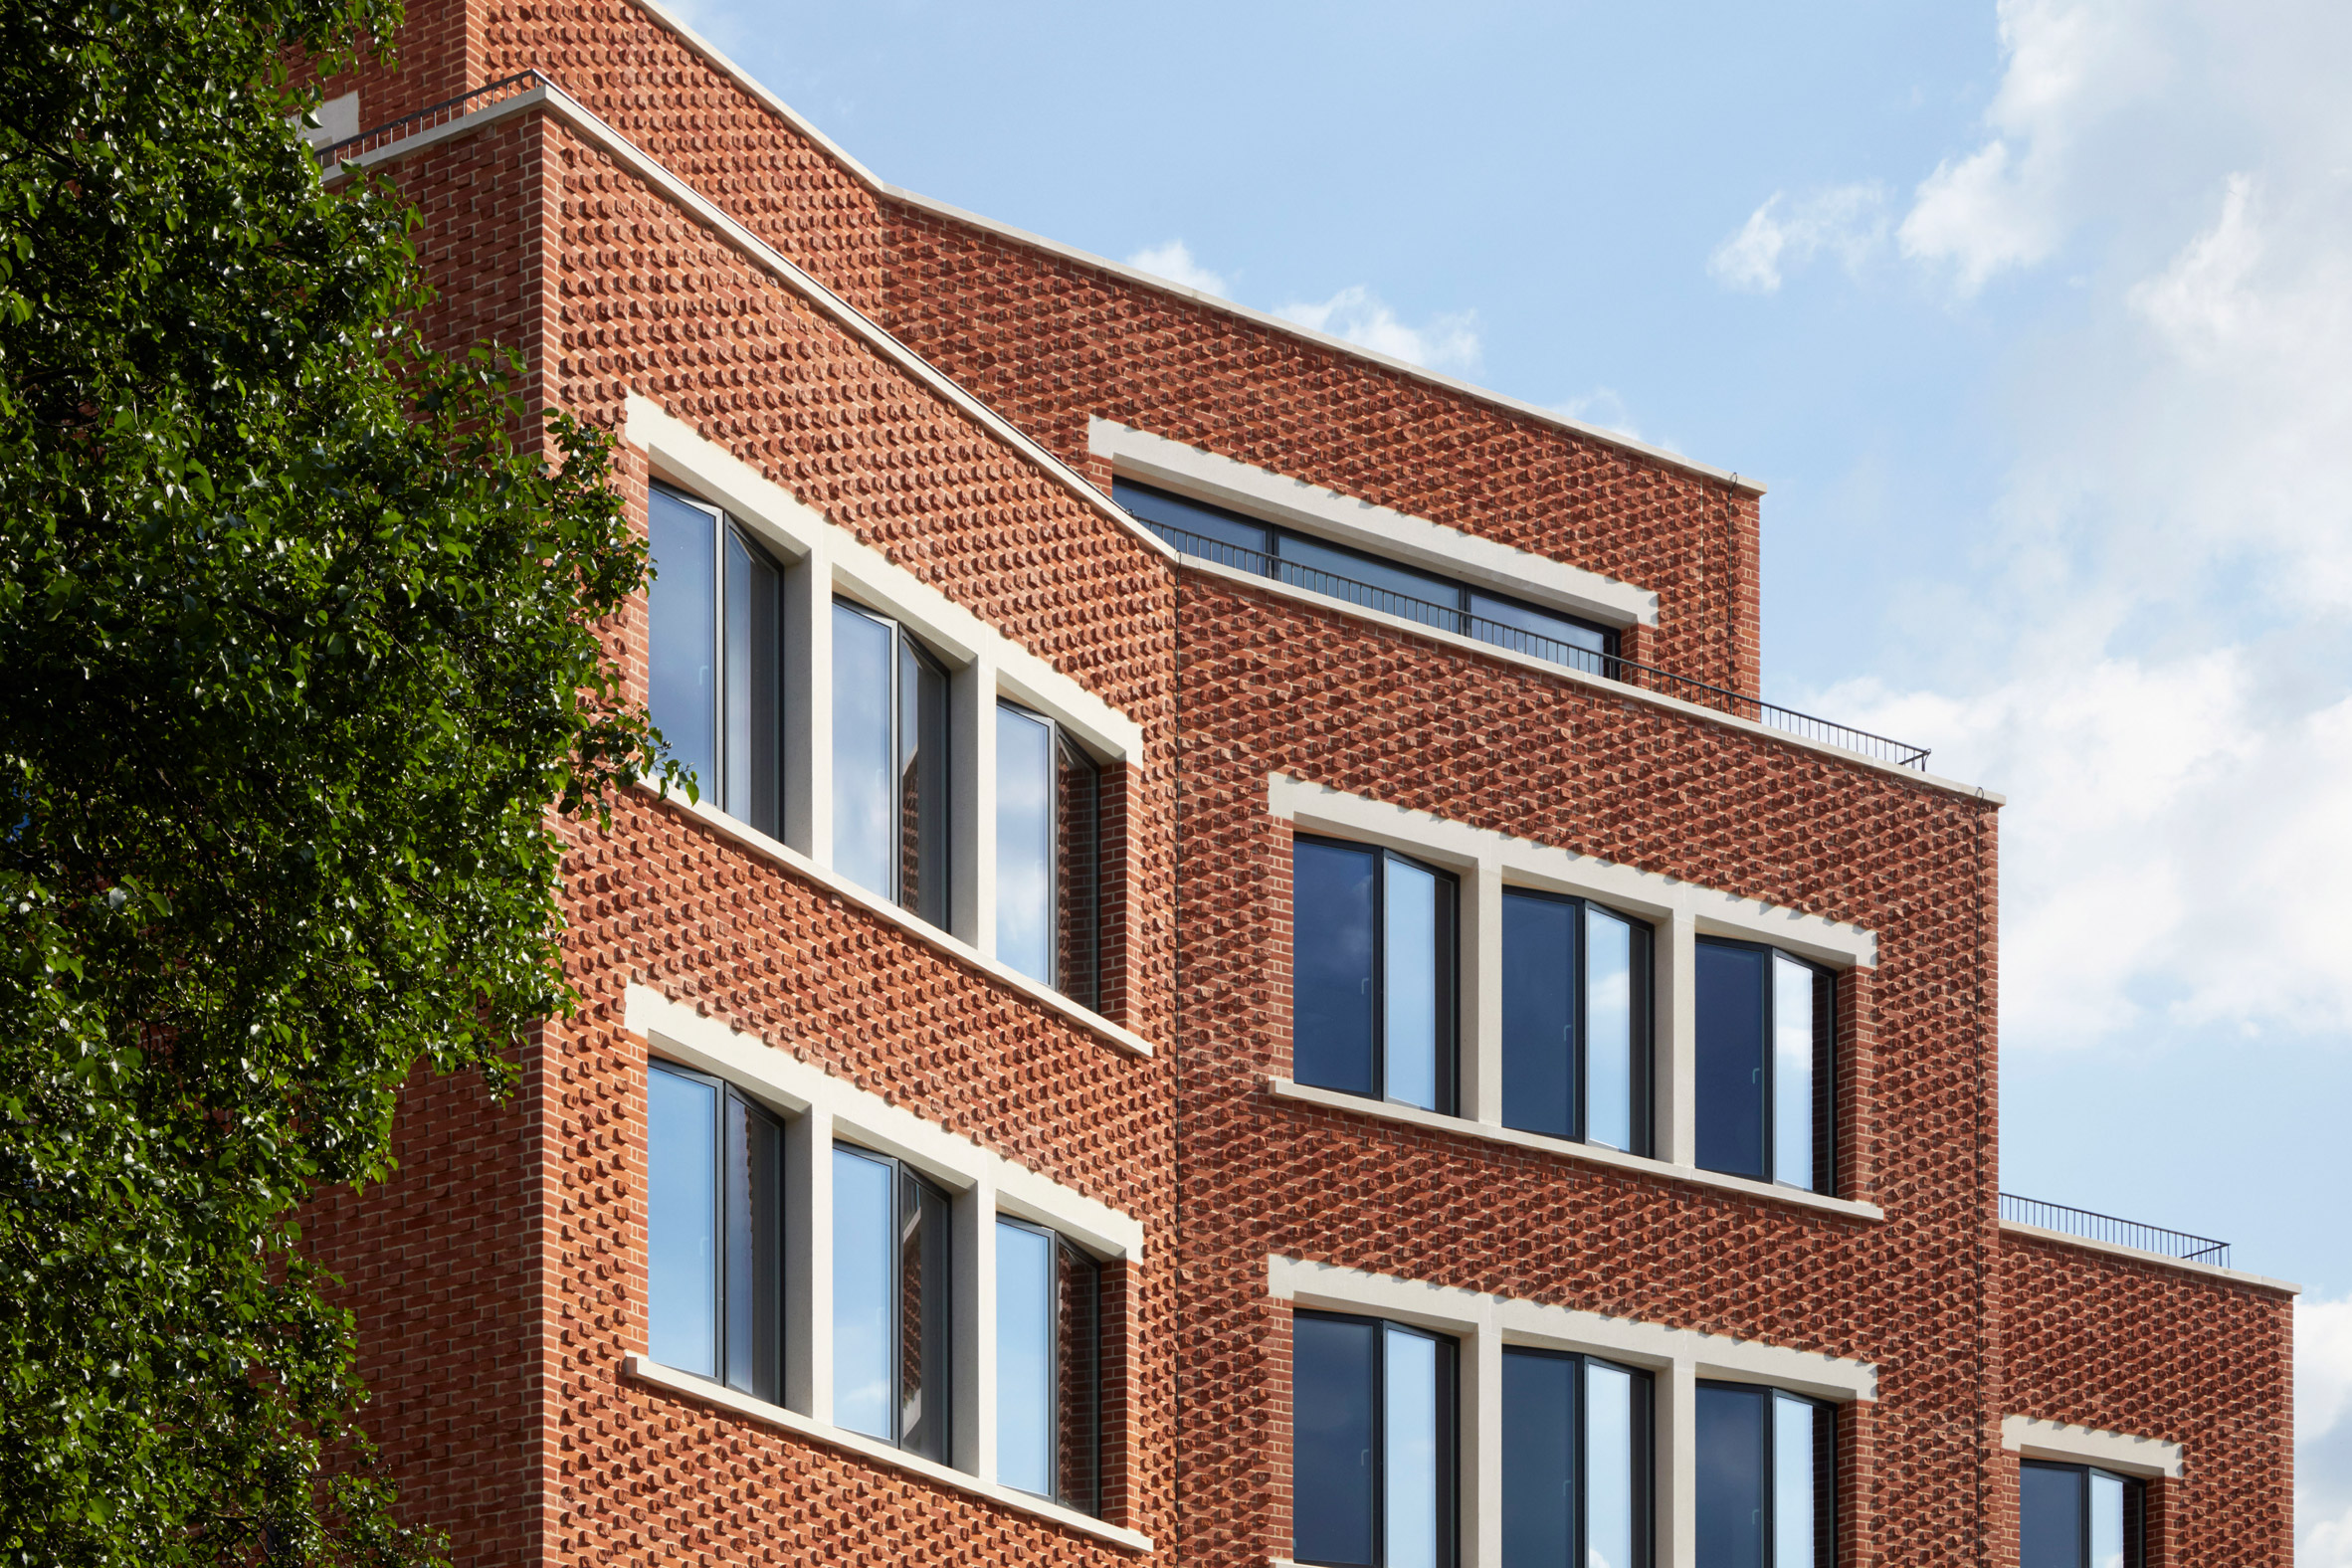 Brick facade of The Department Store Studios by Squire and Partners